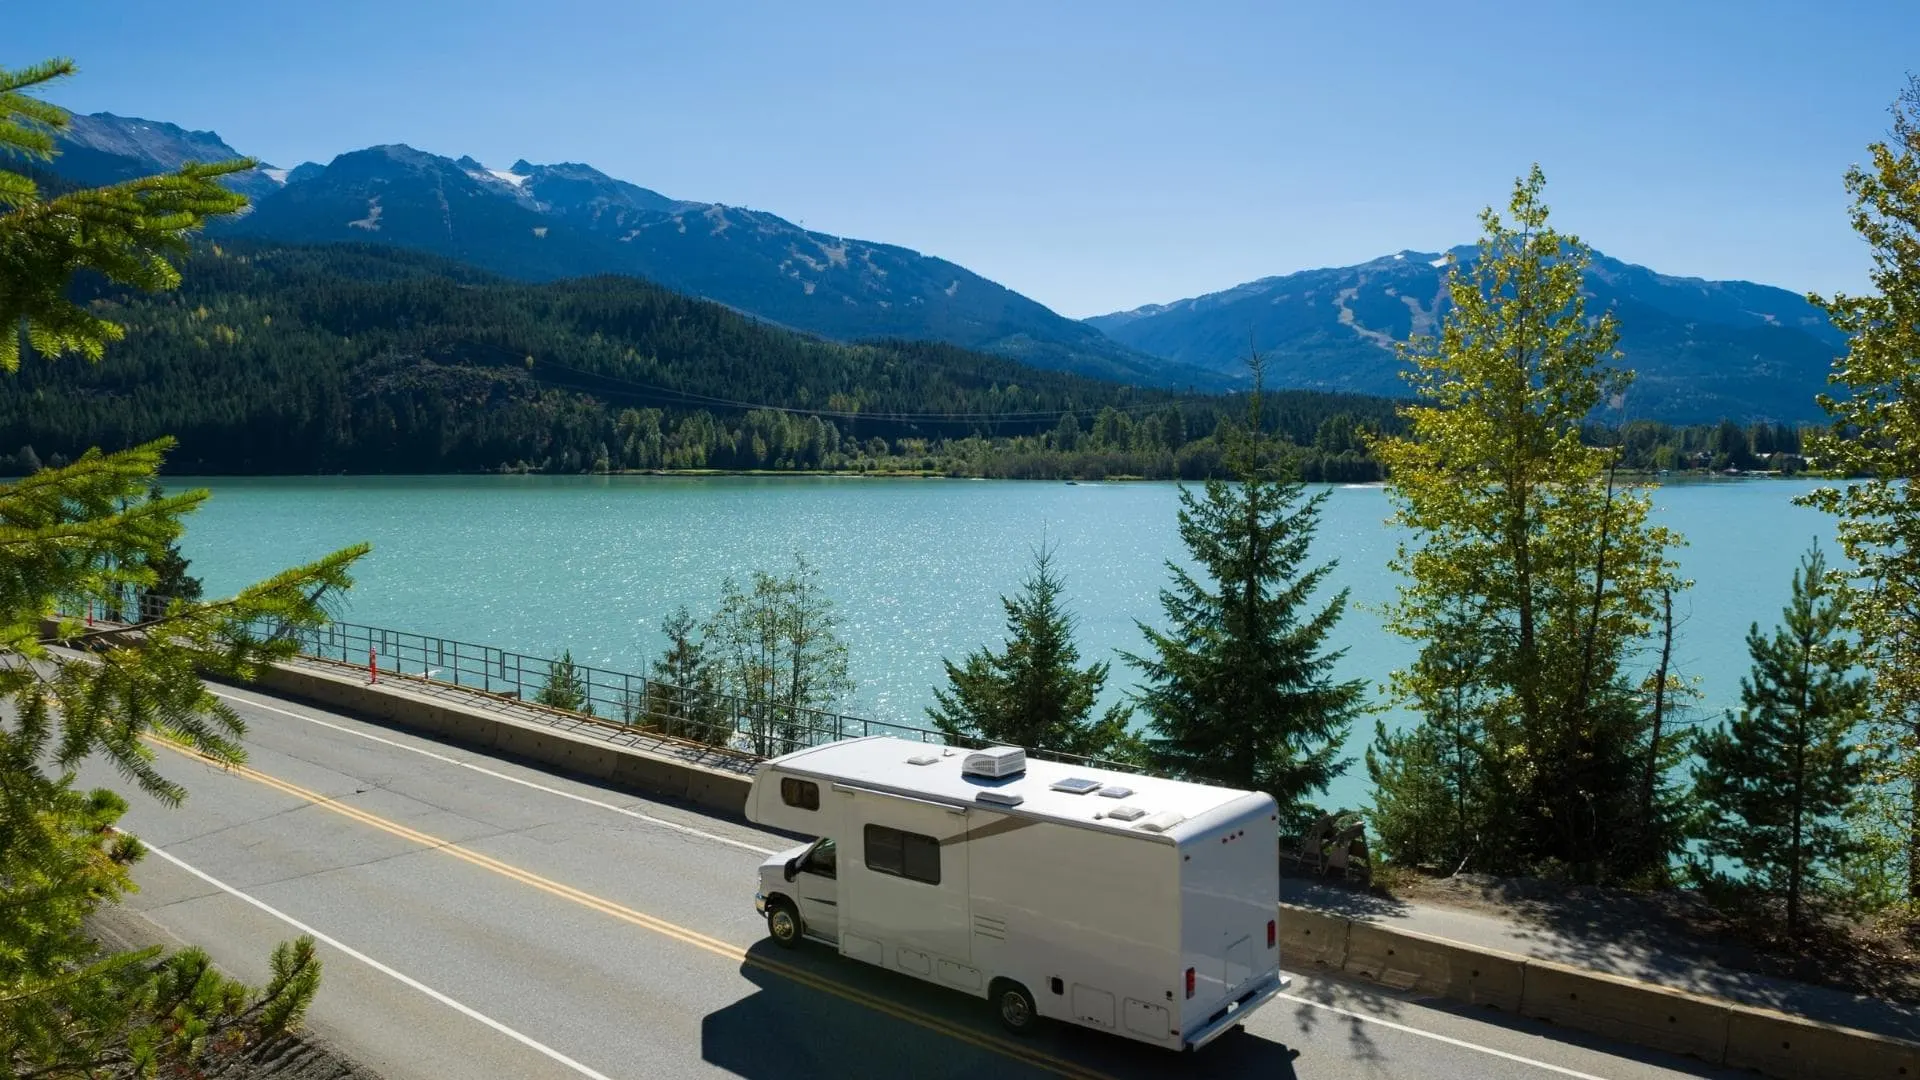 Photo of an RV driving along the road beside a lake